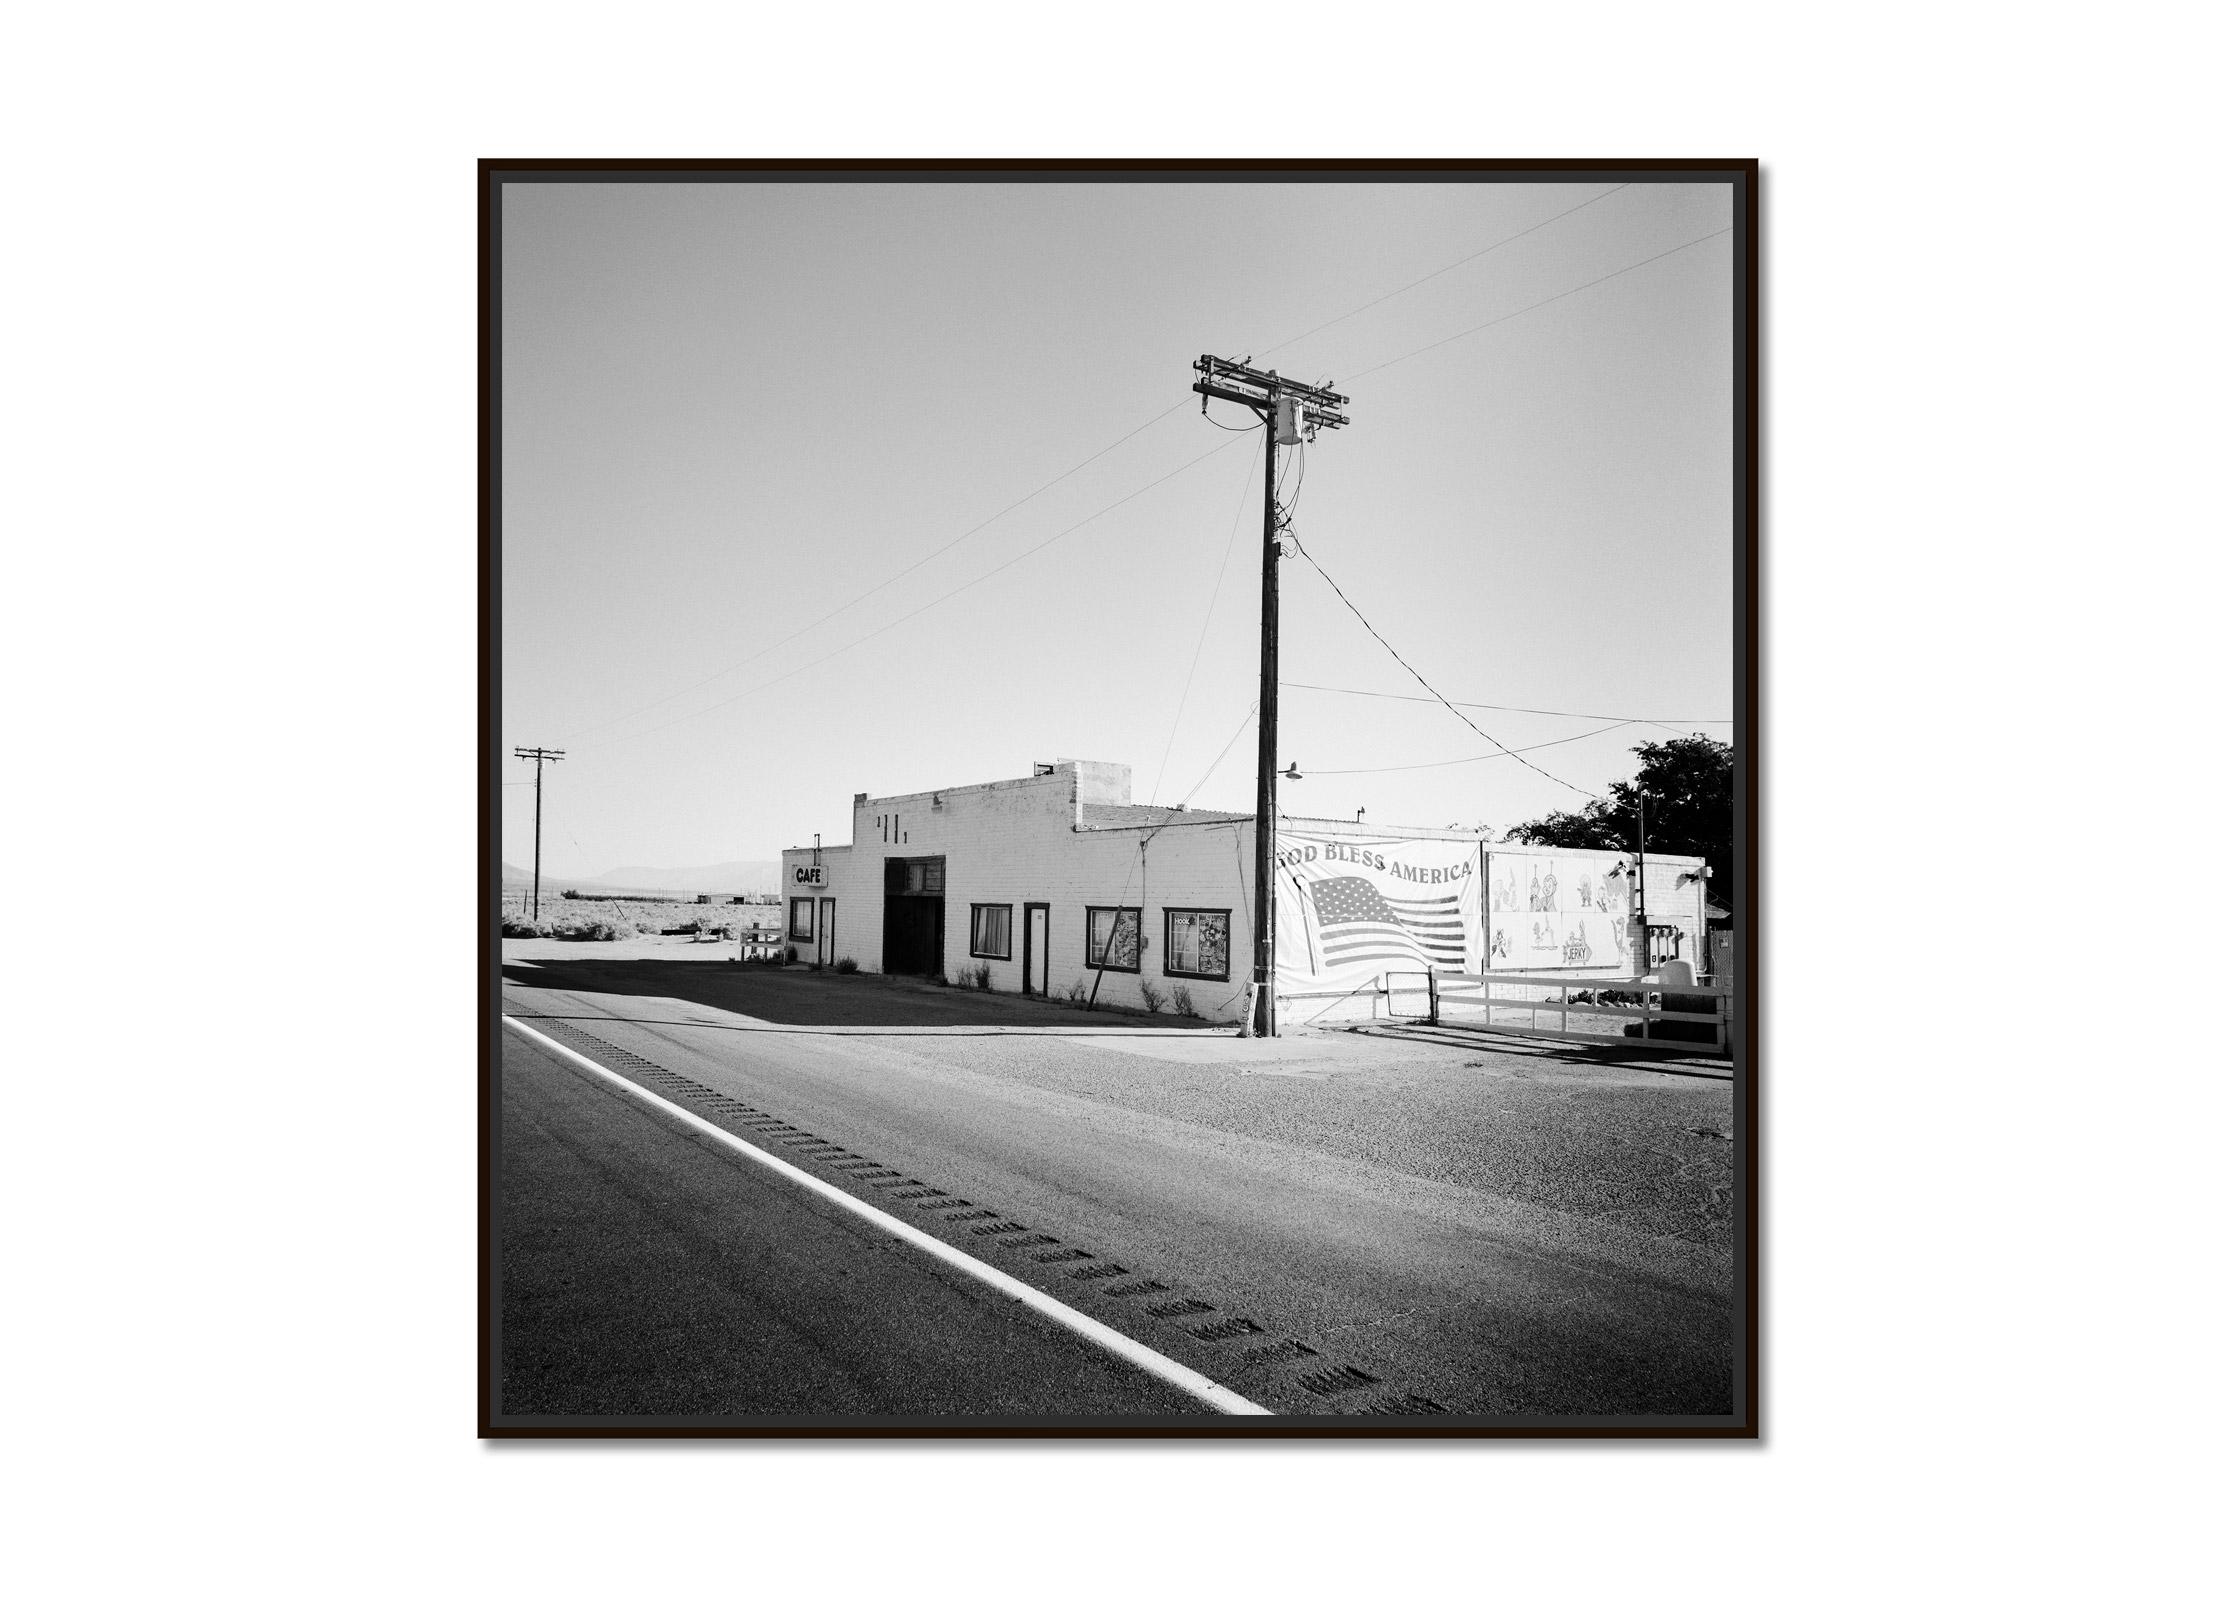 God Bless America, California, USA,  black and white art landscape photography - Photograph by Gerald Berghammer